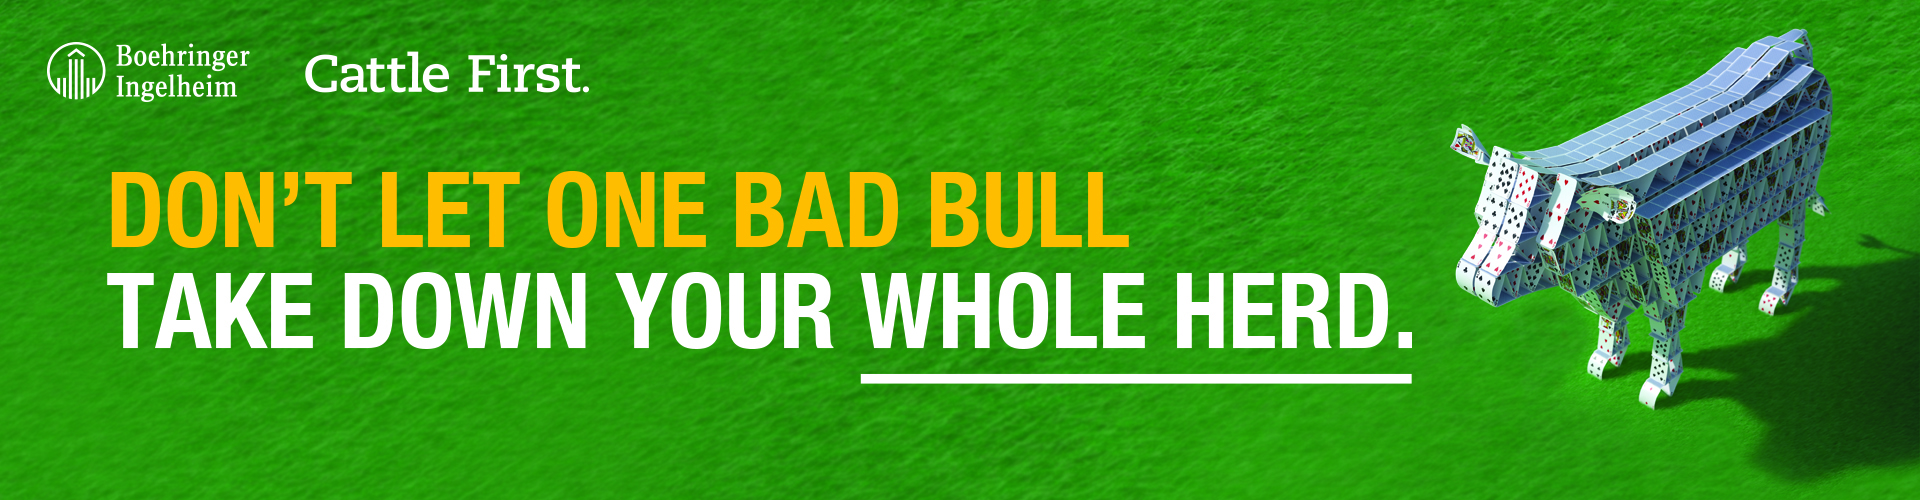 Don't let one bad bull take down your whole herd